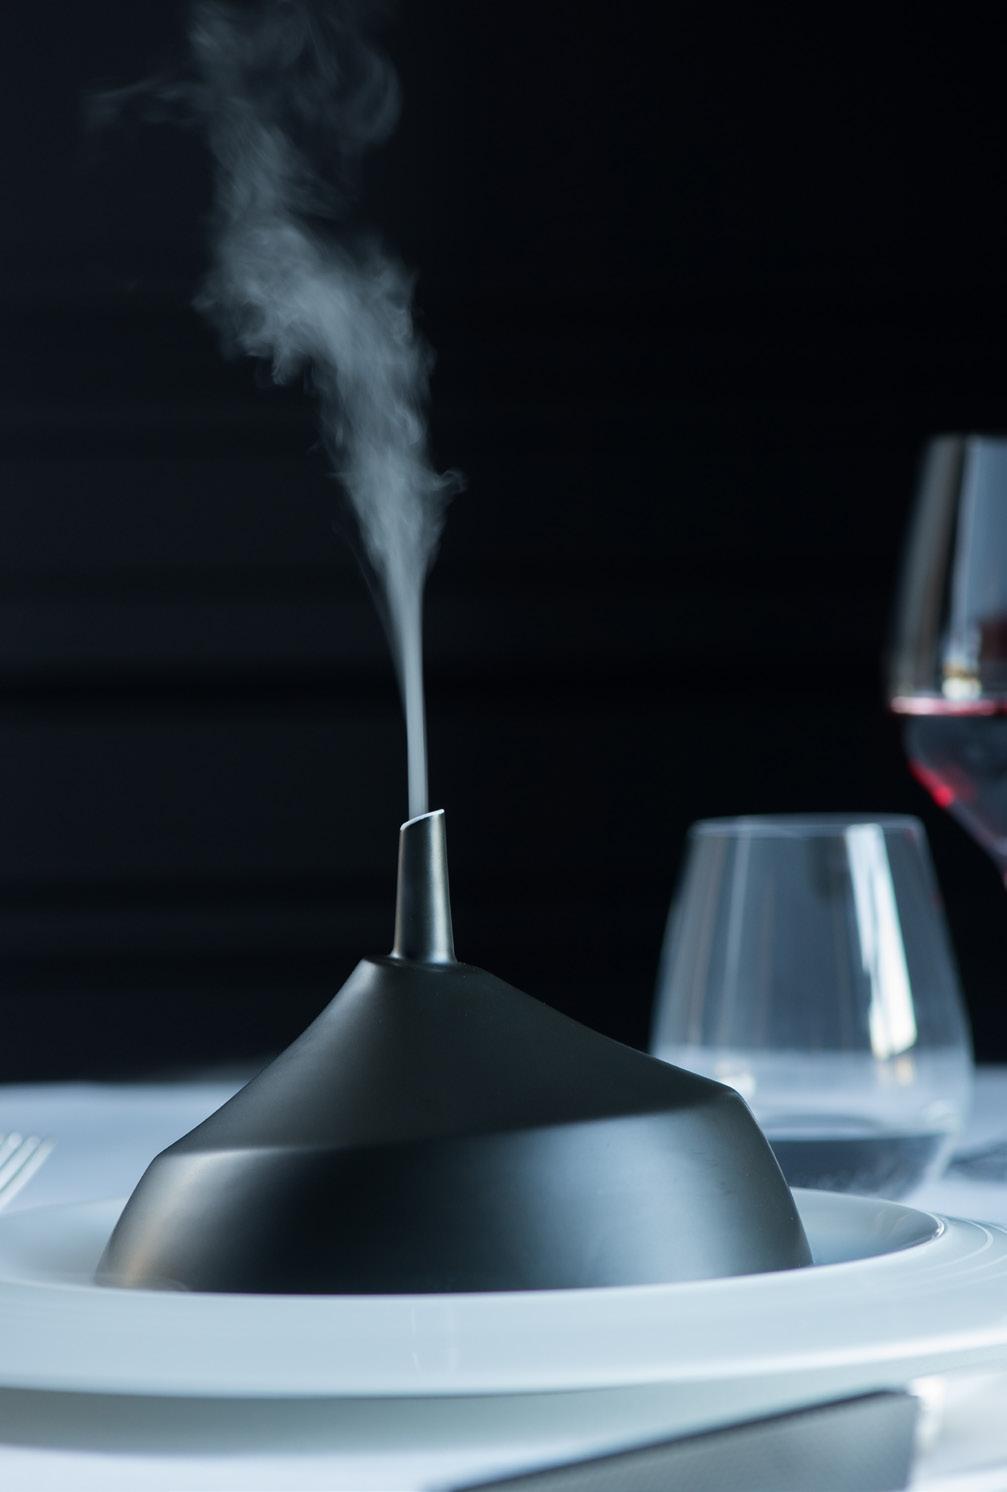 The perforations provide an outlet for steam to escape, like elegant mist. - Cloche with chimney. Allowing steam and aromas to escape- an allusion to a hot oven.